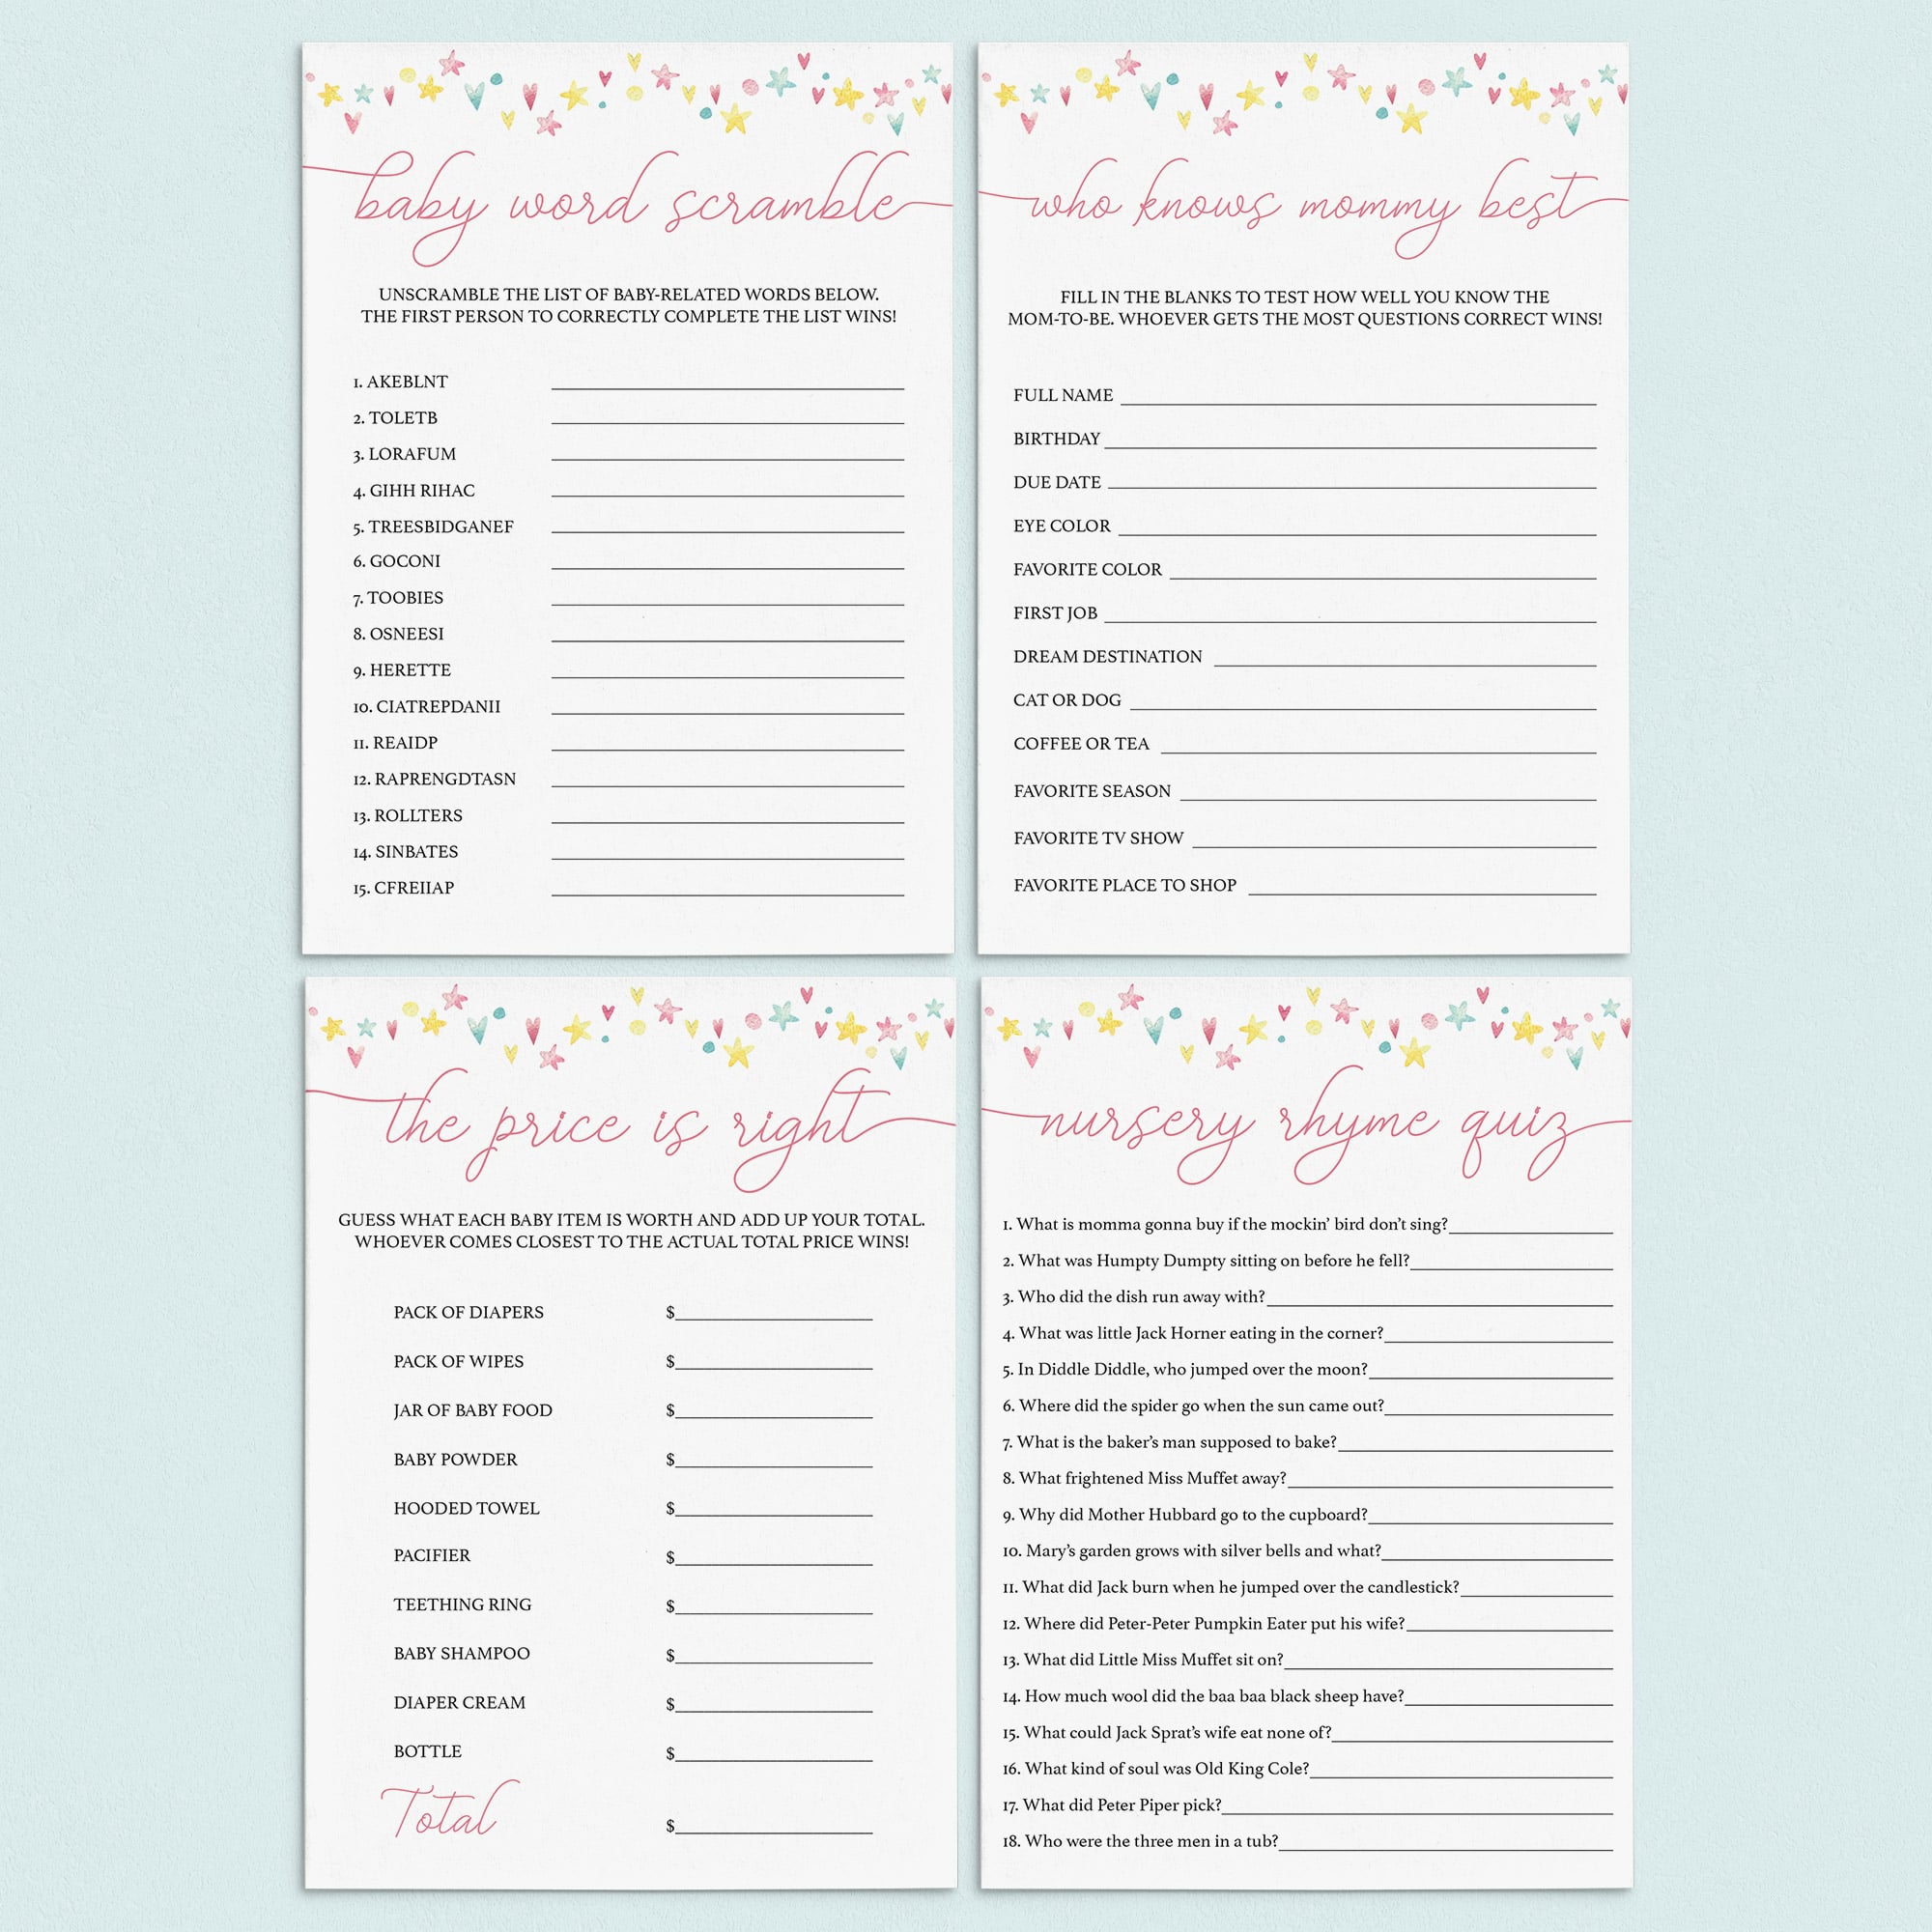 Printable rainbow baby shower games pack by LittleSizzle